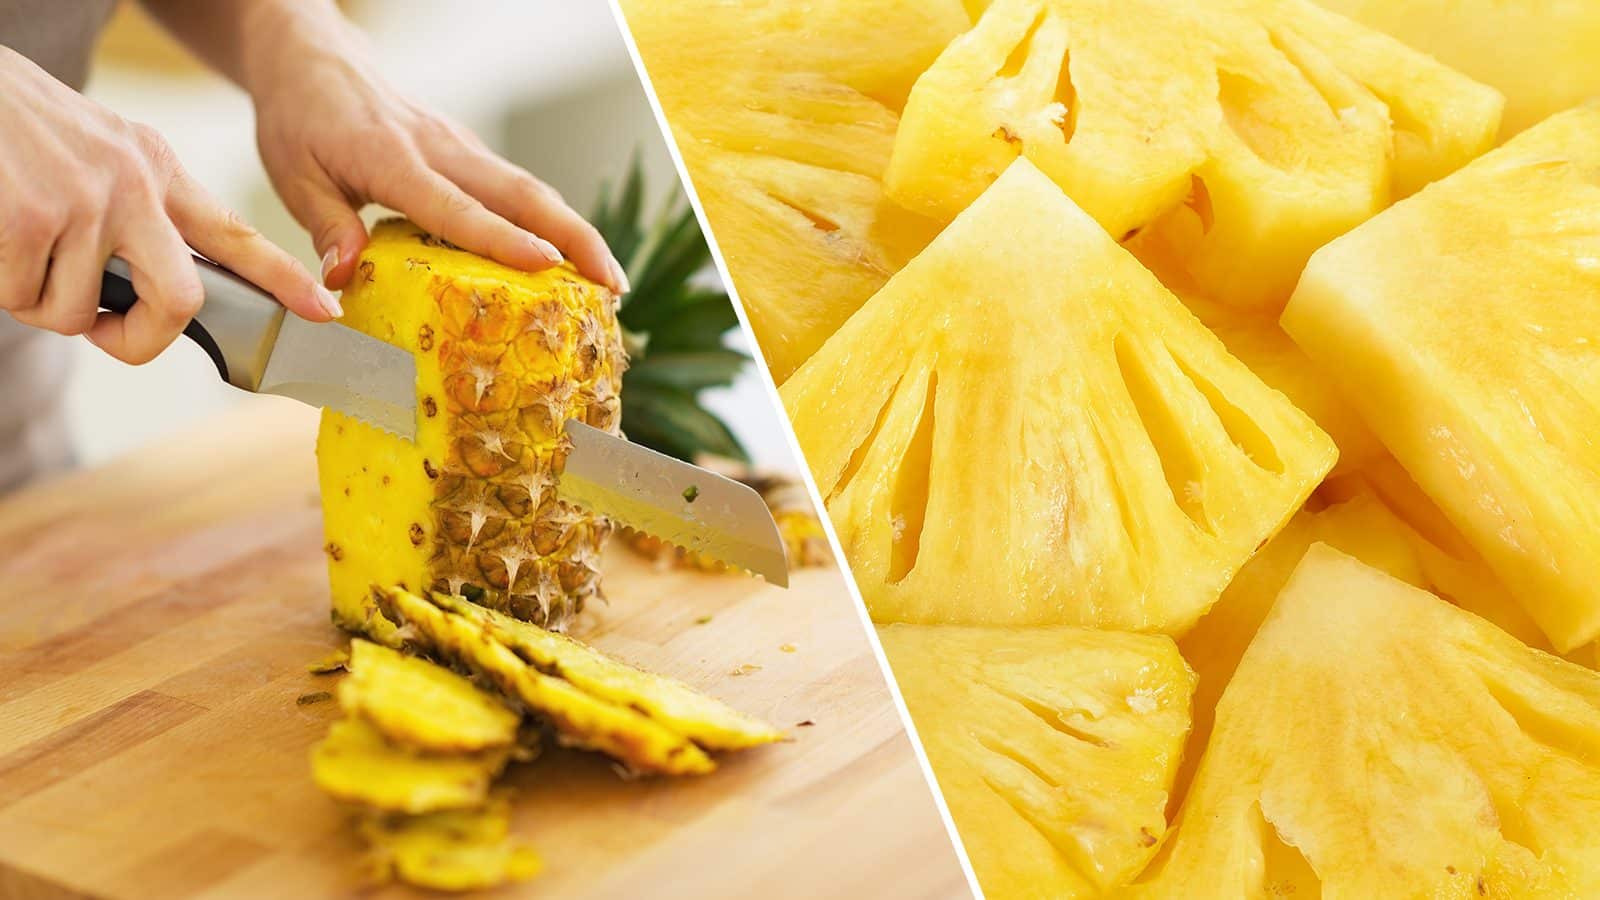 If You’ve Ever Heard of The Pineapple Diet, This Is Why You Shouldn’t Try It